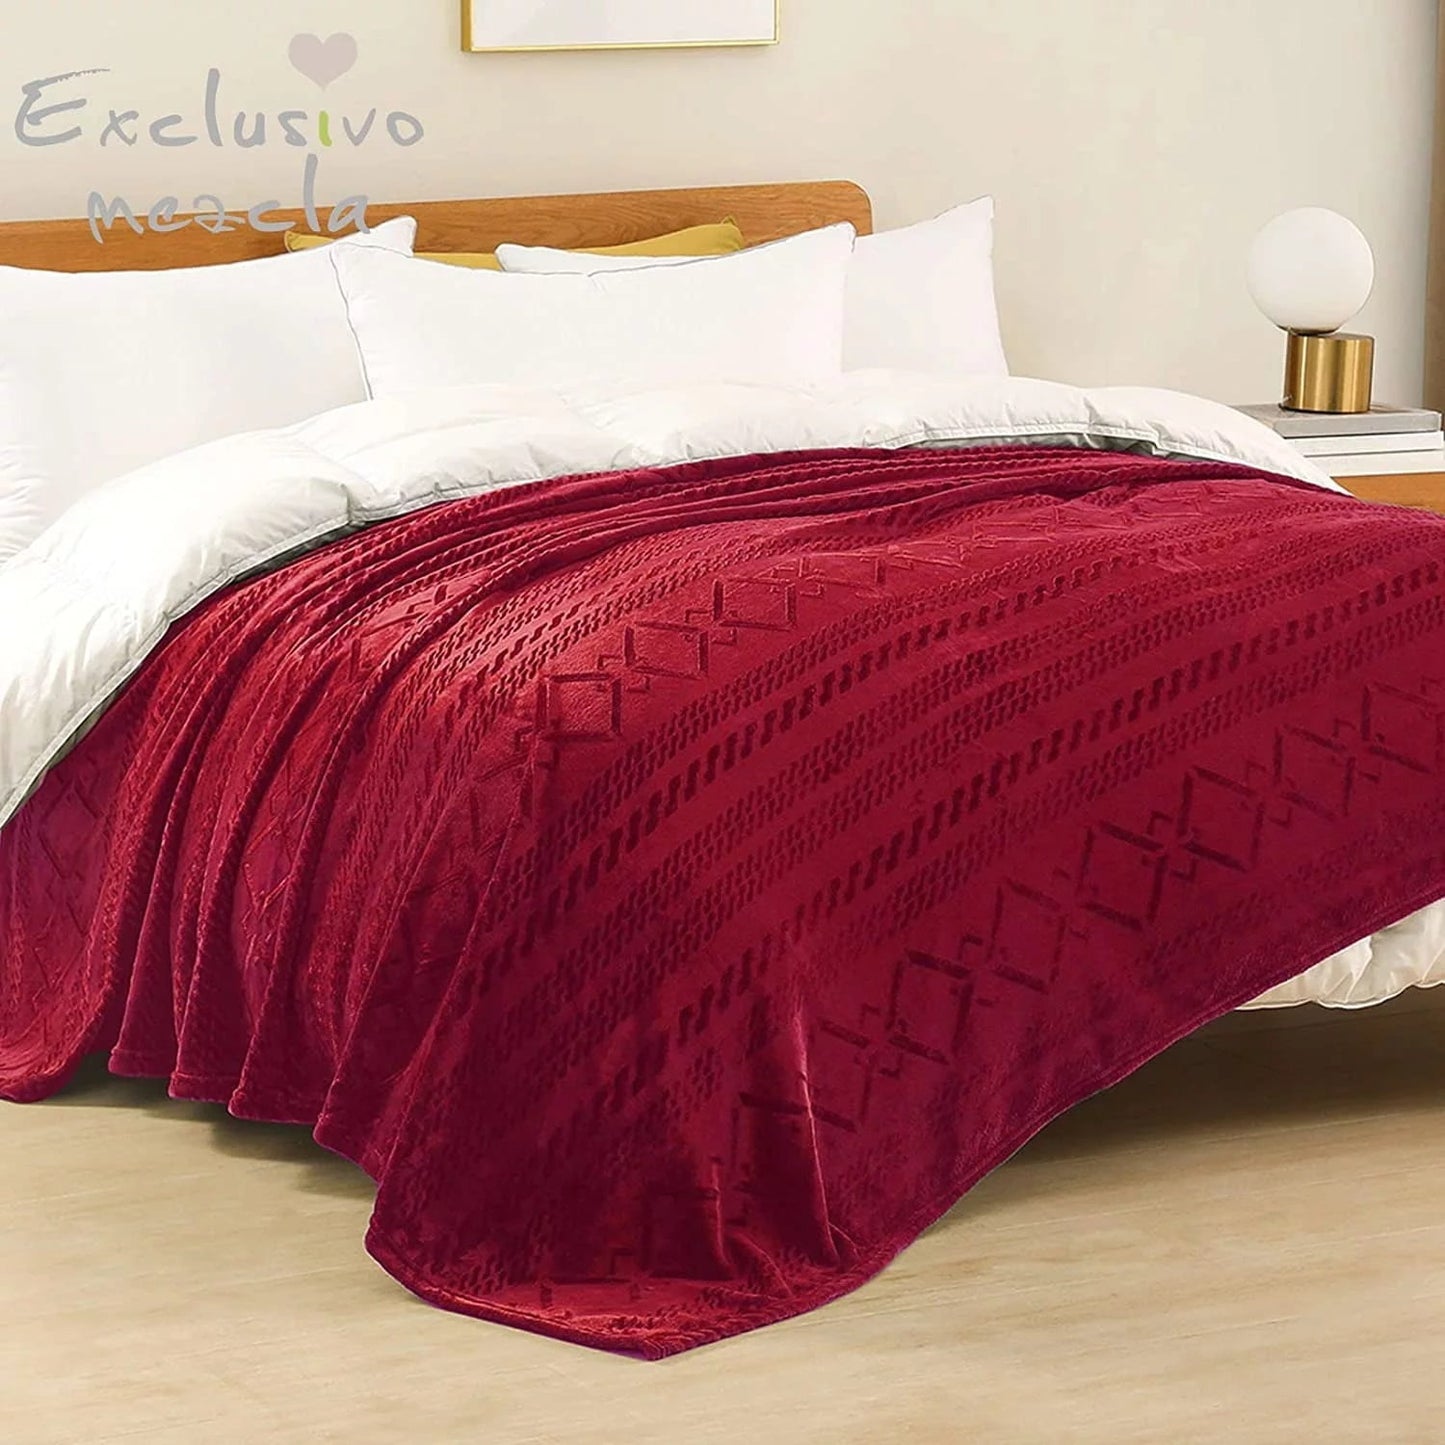 Exclusivo Mezcla Queen Size Soft Bed Blanket, Warm Fuzzy Luxury Bed Blankets, Decorative Geometry Pattern Plush Throw Blanket for Bed, 90x90 Inches, Red